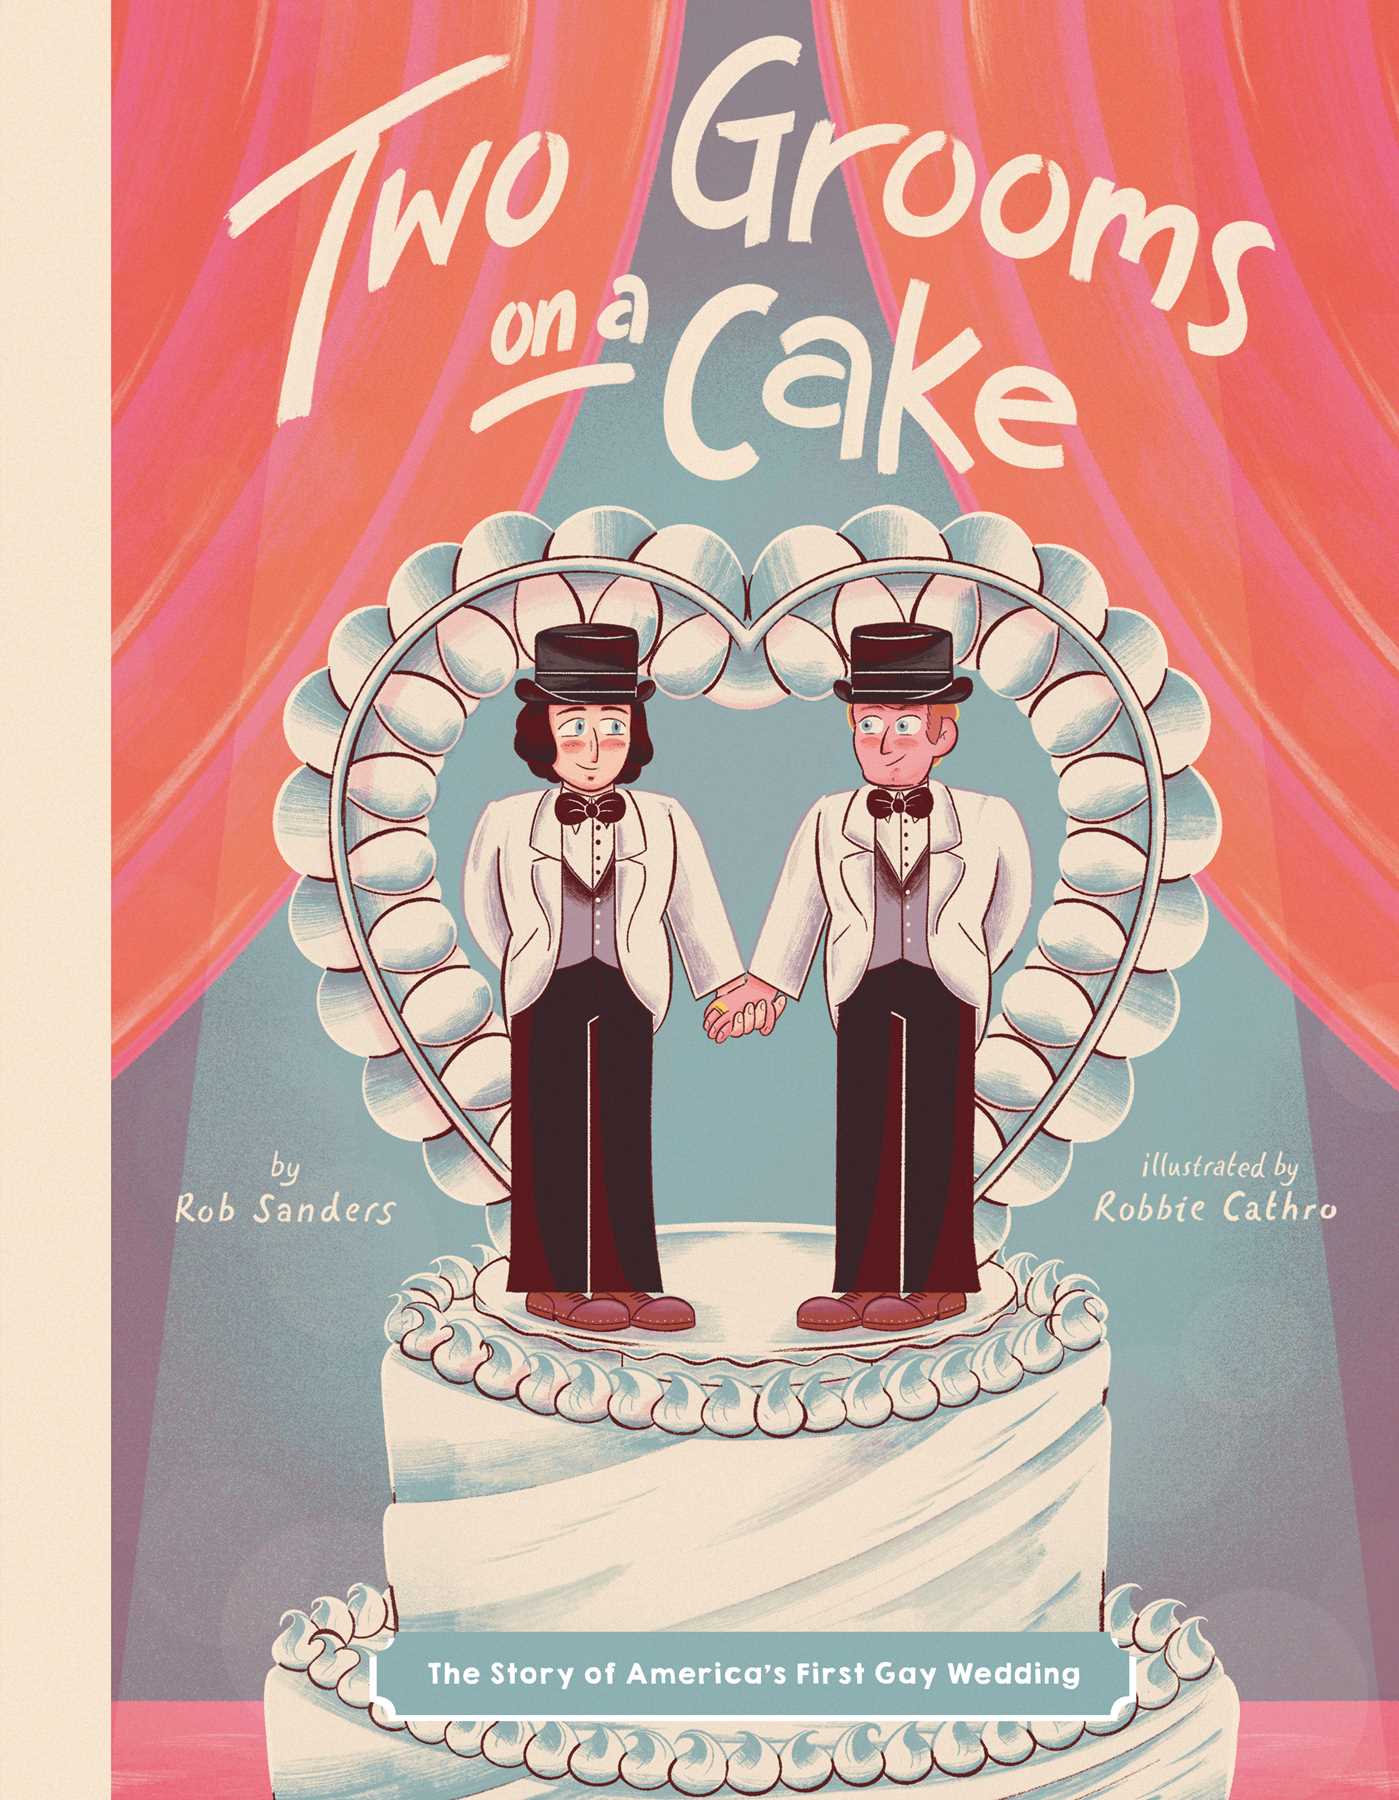 Two Grooms on a Cake: The Story of America's First Gay Wedding  by Rob Sanders